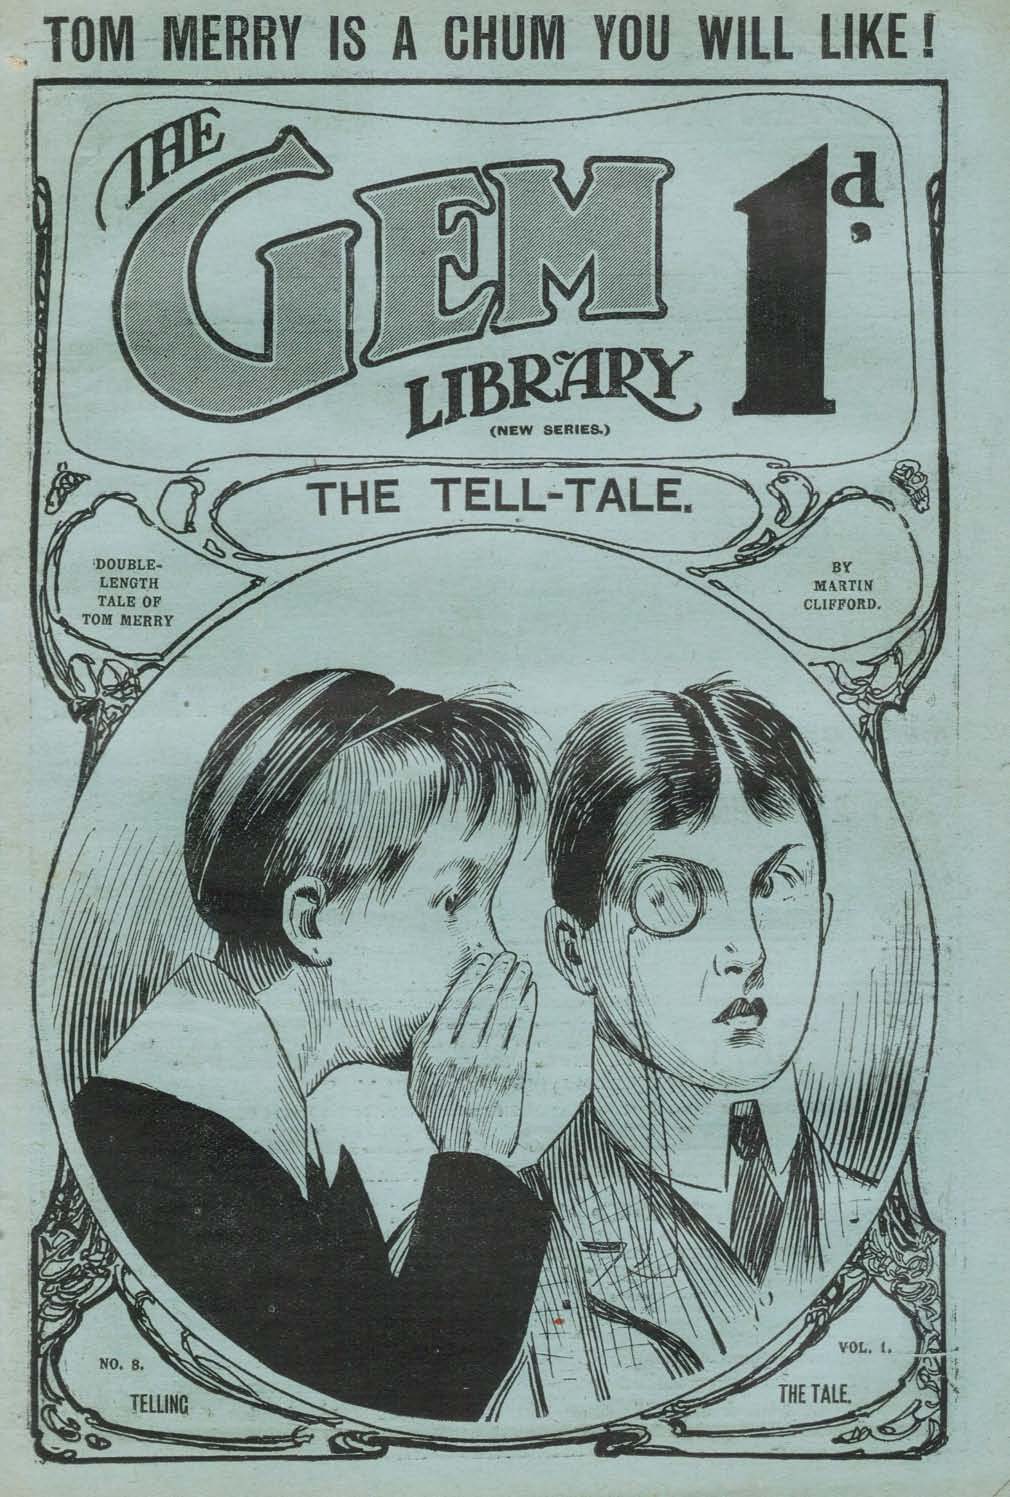 Book Cover For The Gem v2 8 - The Tell-Tale